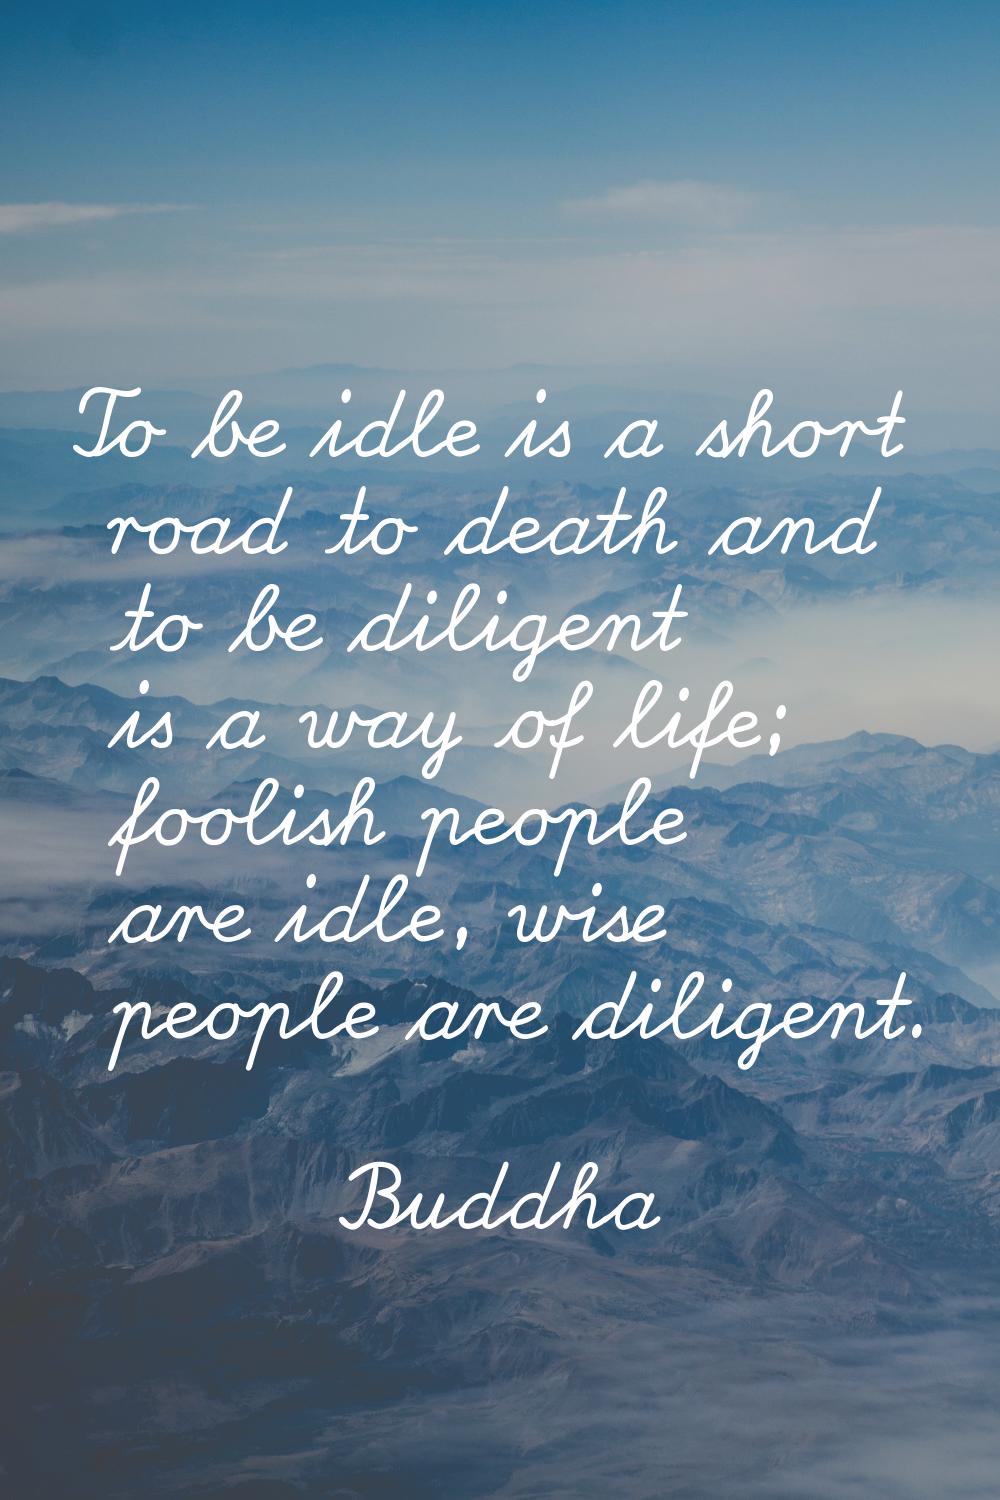 To be idle is a short road to death and to be diligent is a way of life; foolish people are idle, w